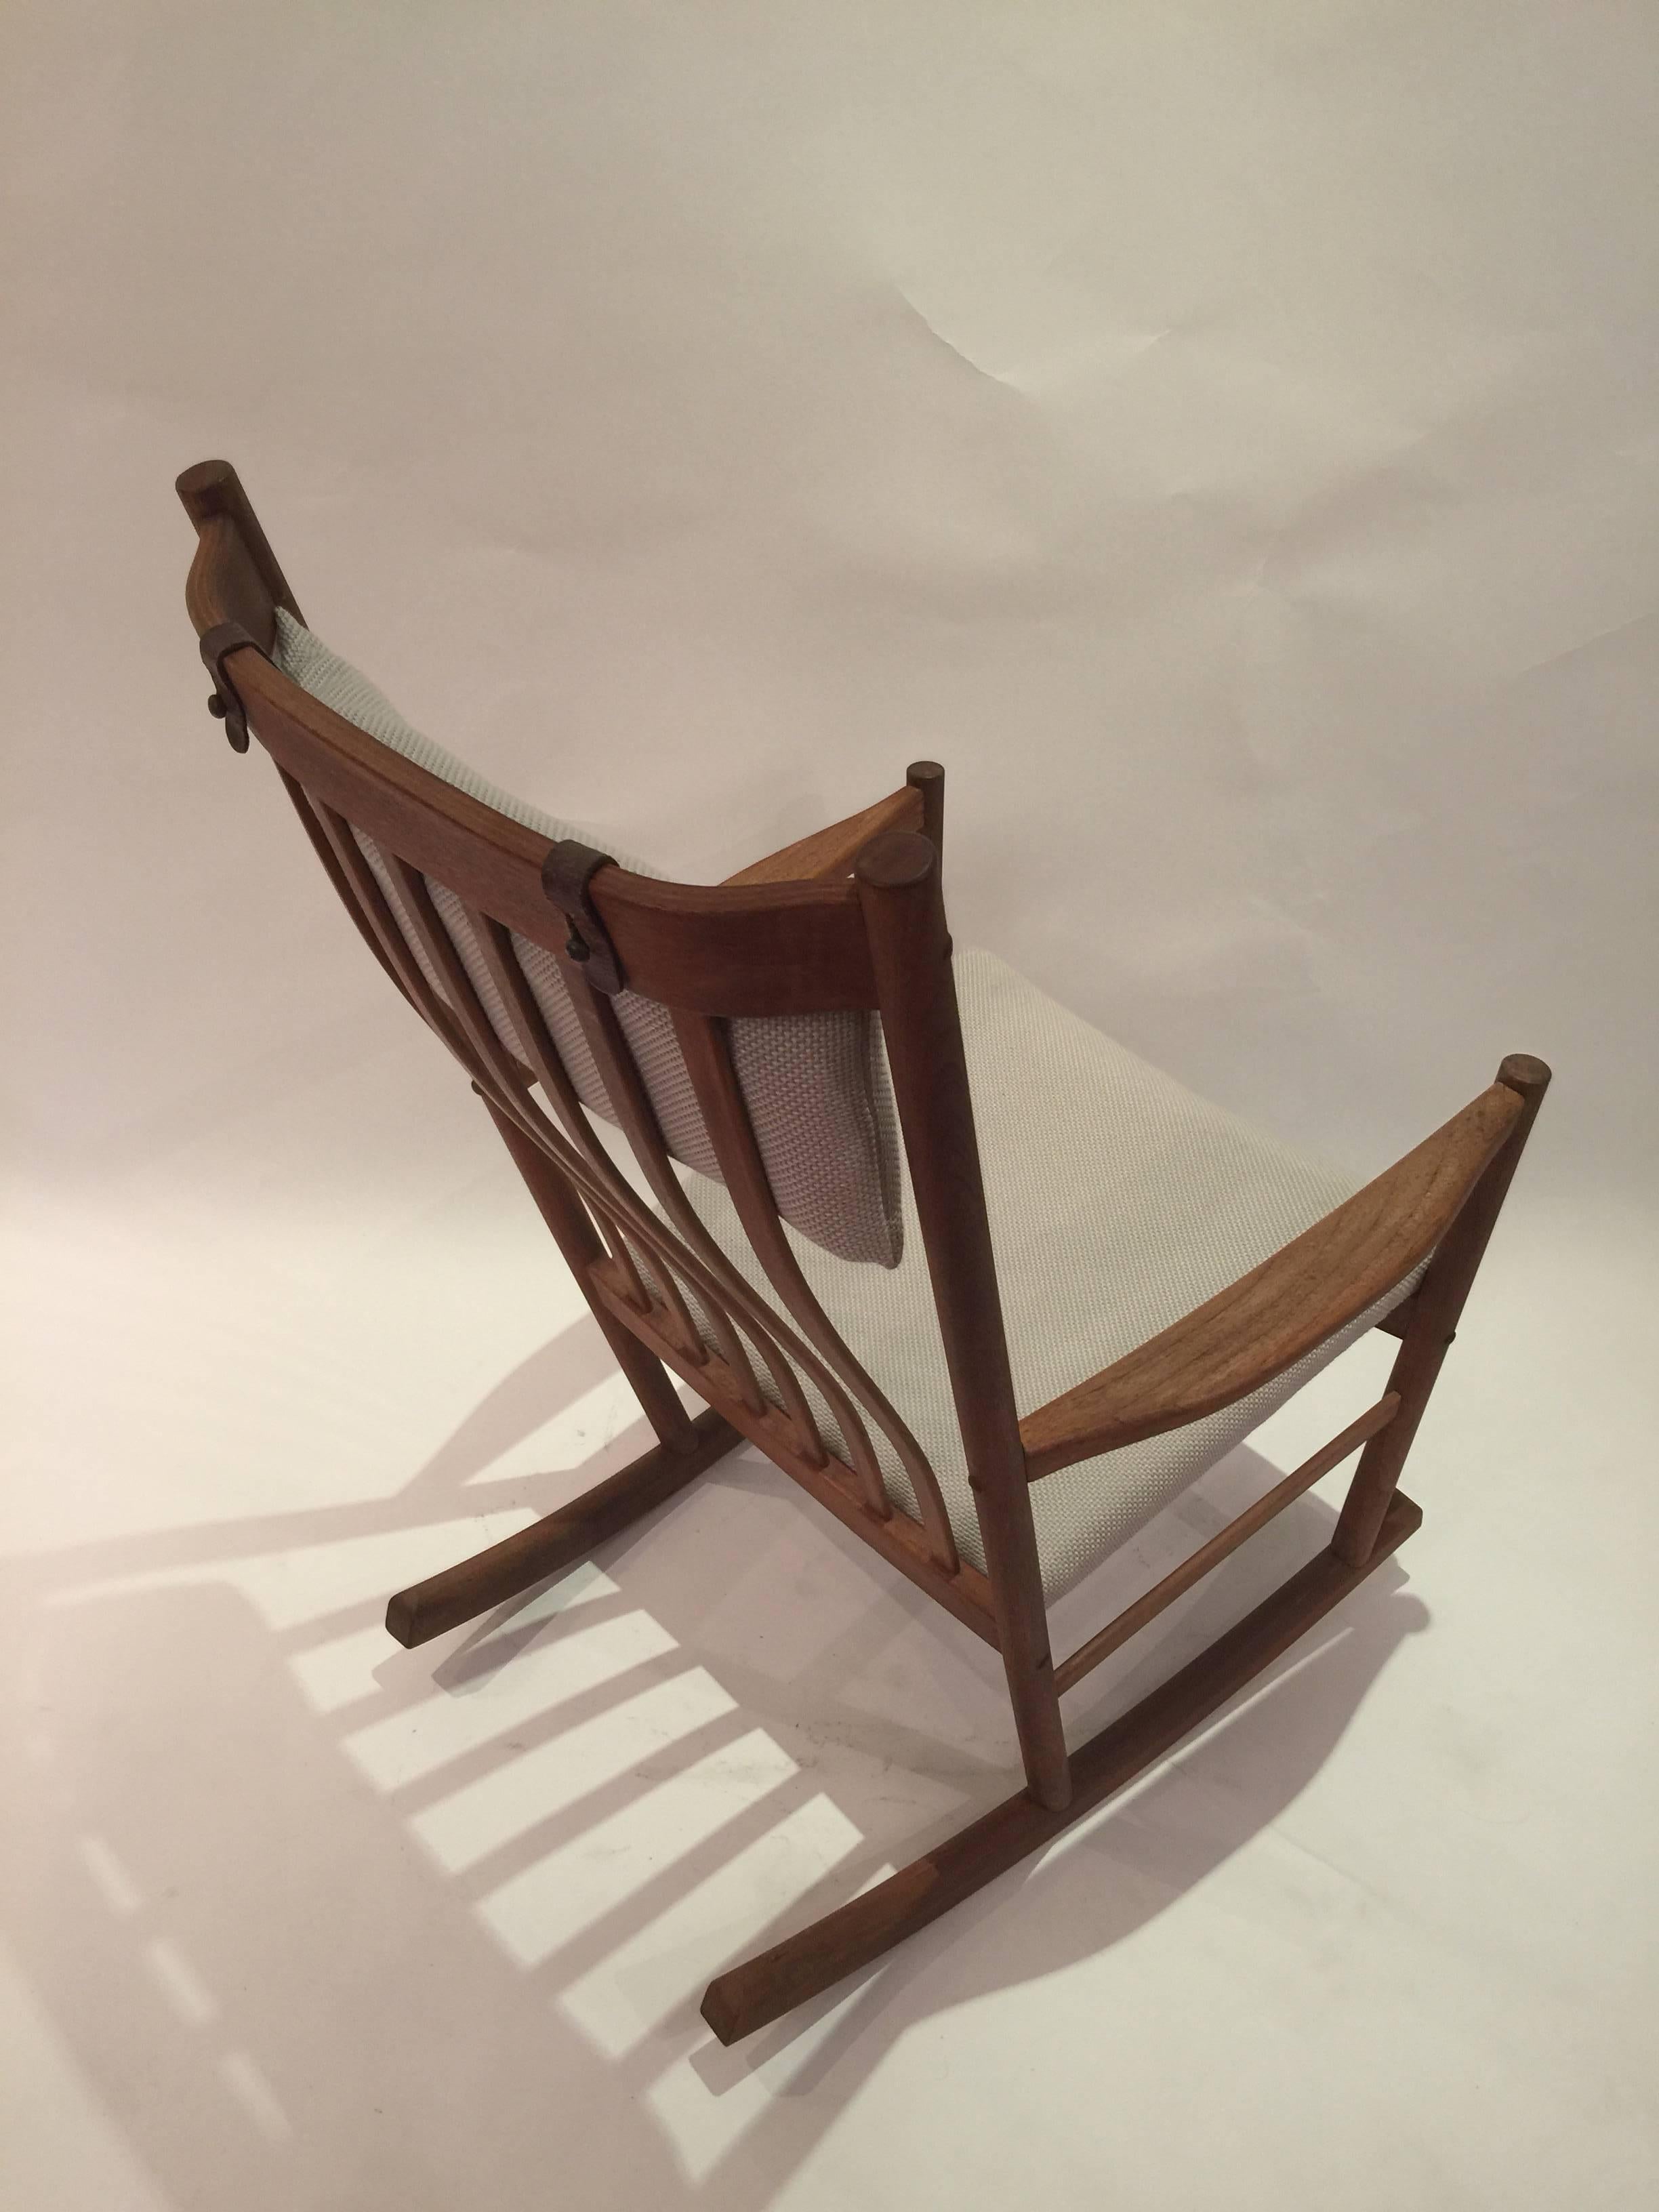 High back rocking chair with simple design and attention to detail by designer Hans Wegner for manufacturer Tarm Stole. Steam bent teak slat back and newly reupholstered in white and cream opalescent cotton woven fabric.